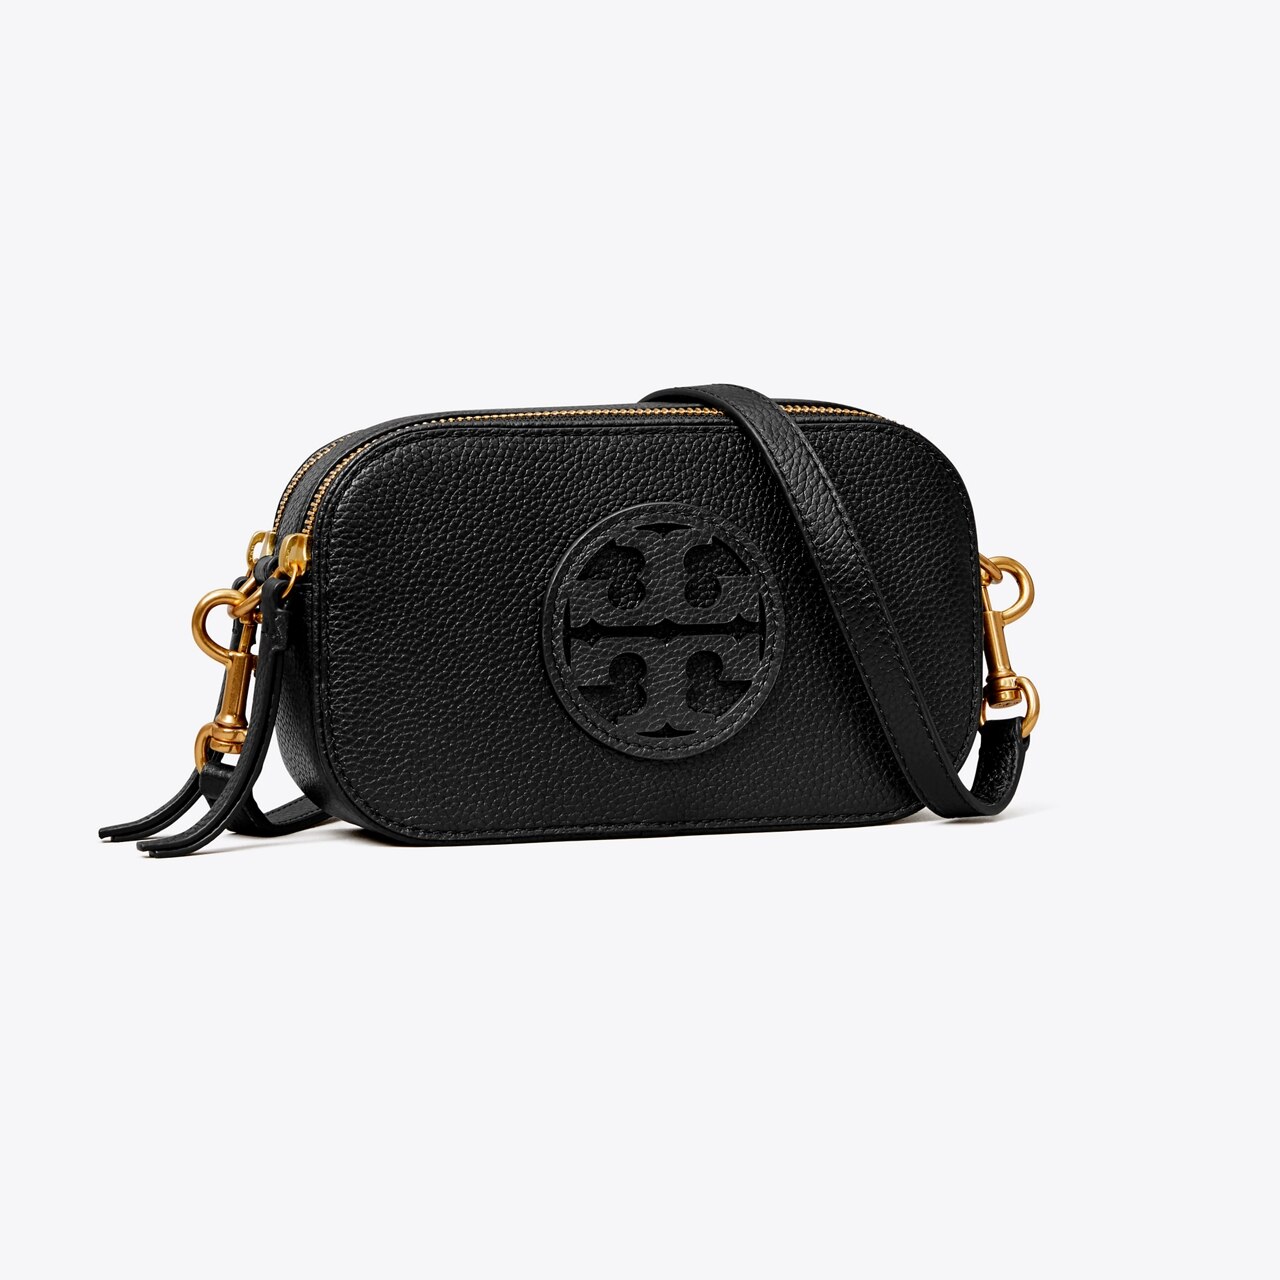 The 39 Best Designer Crossbody Bags to Wear Daily